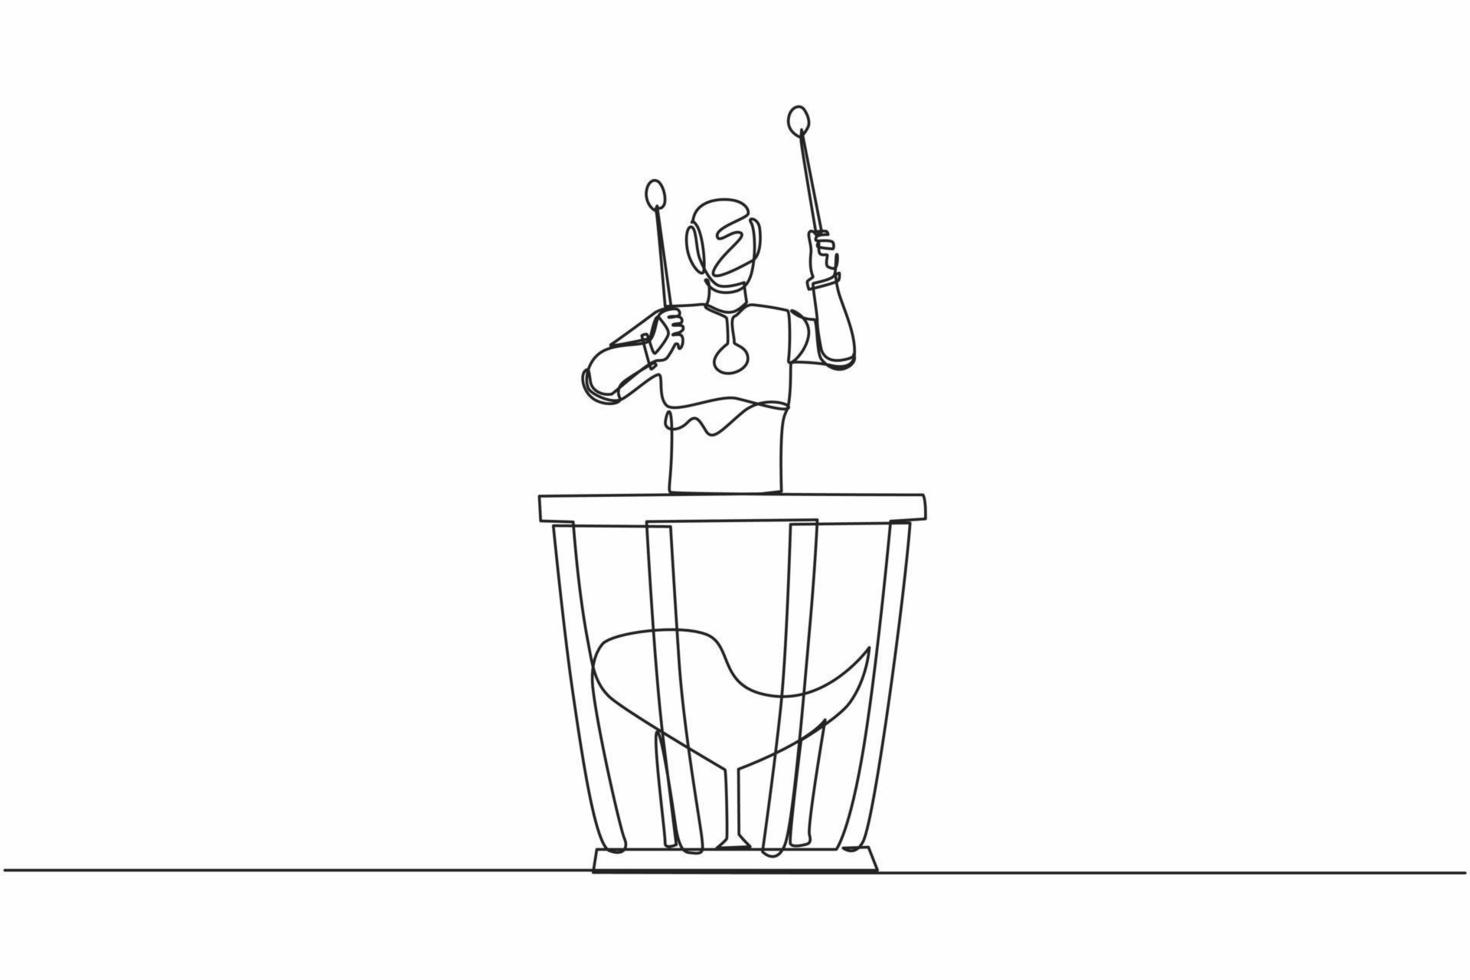 Single continuous line drawing robot percussion player holding stick and play timpani. Robotic artificial intelligence. Electronic technology industry. One line draw graphic design vector illustration